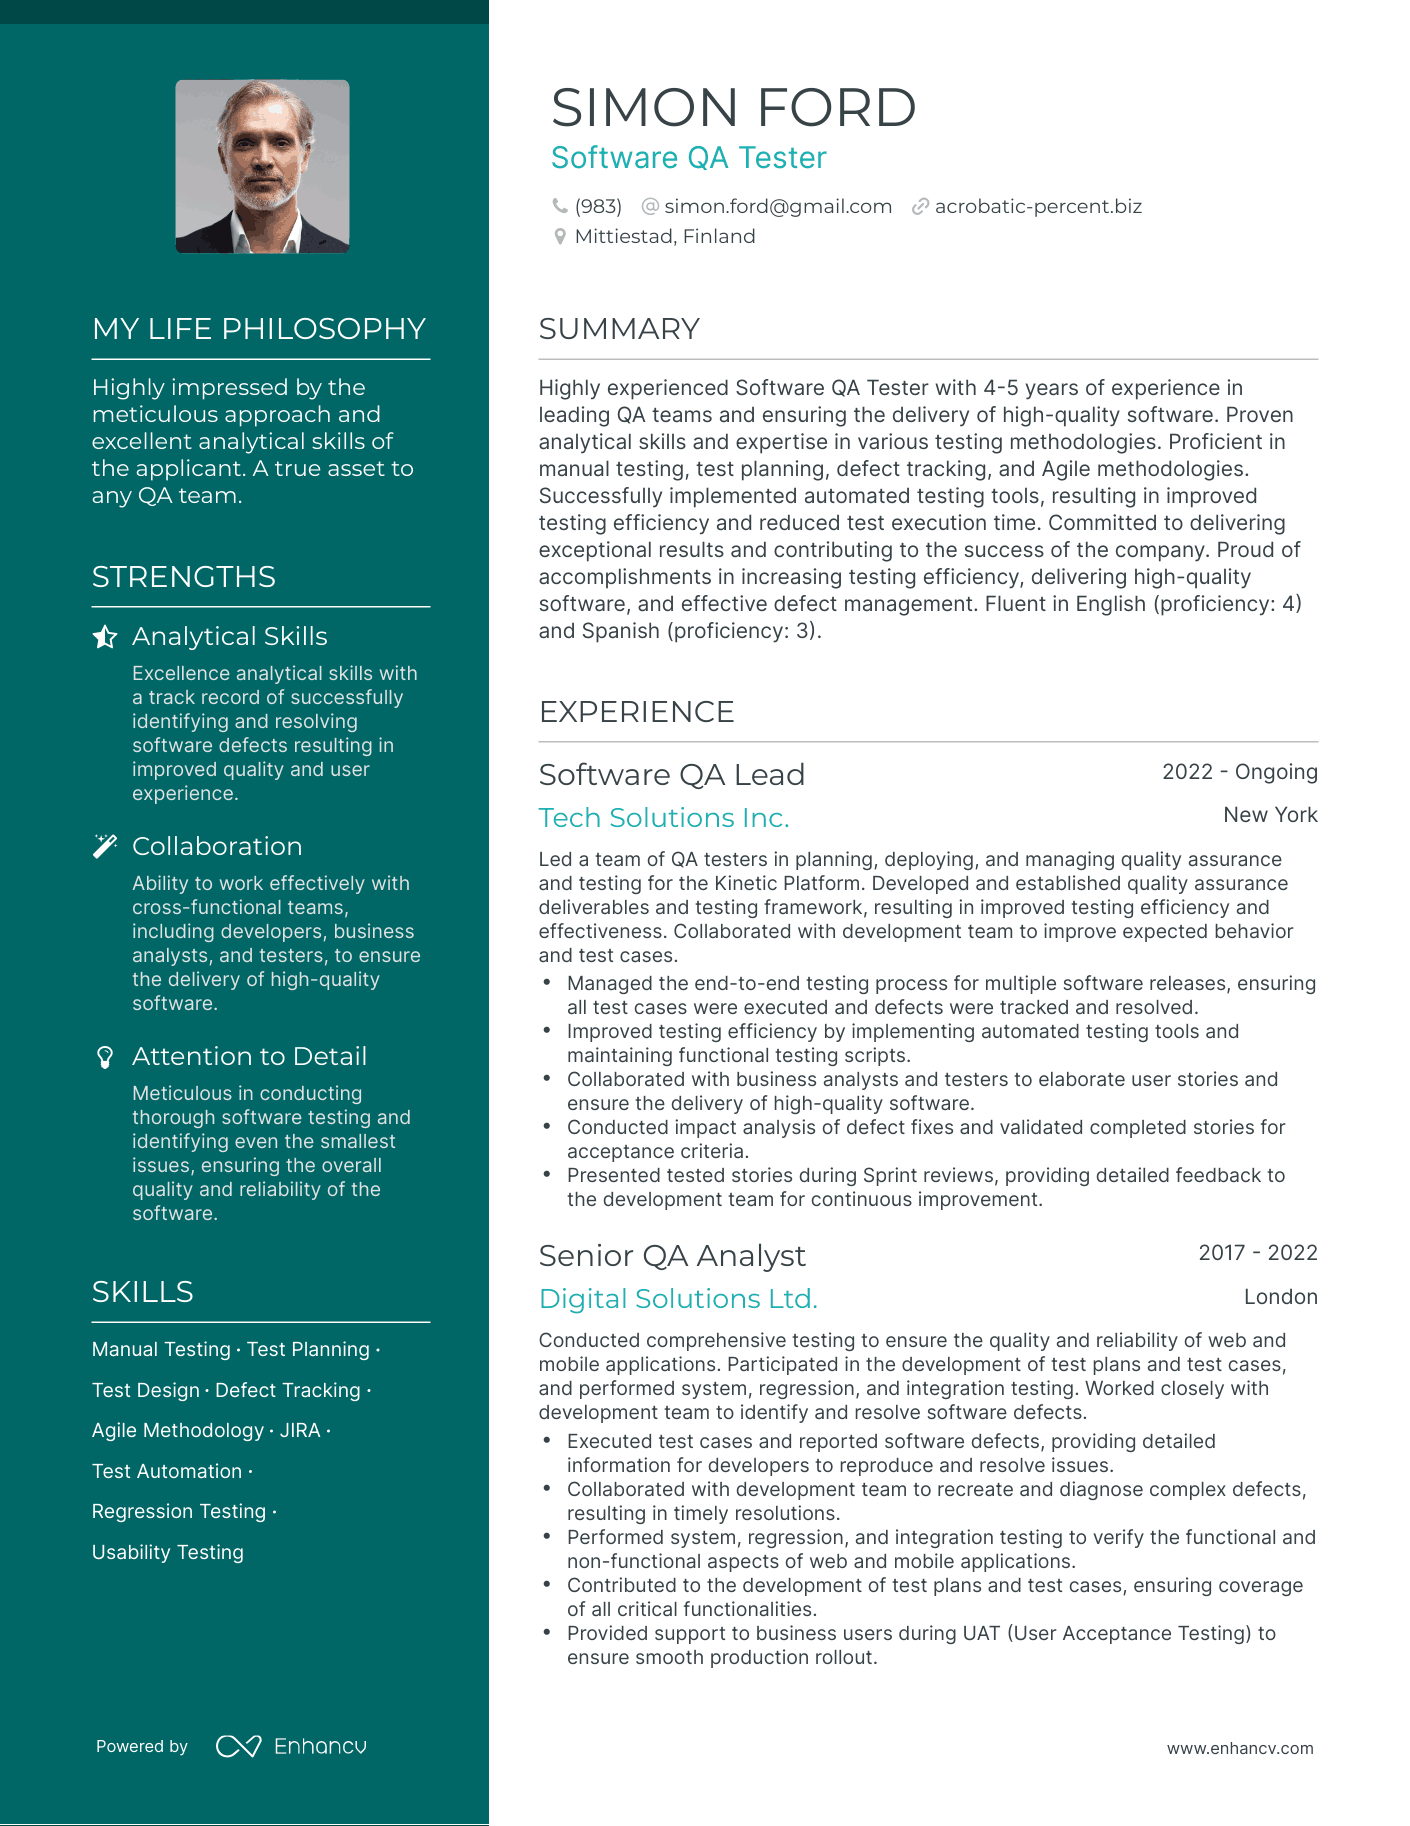 Software QA Tester resume example